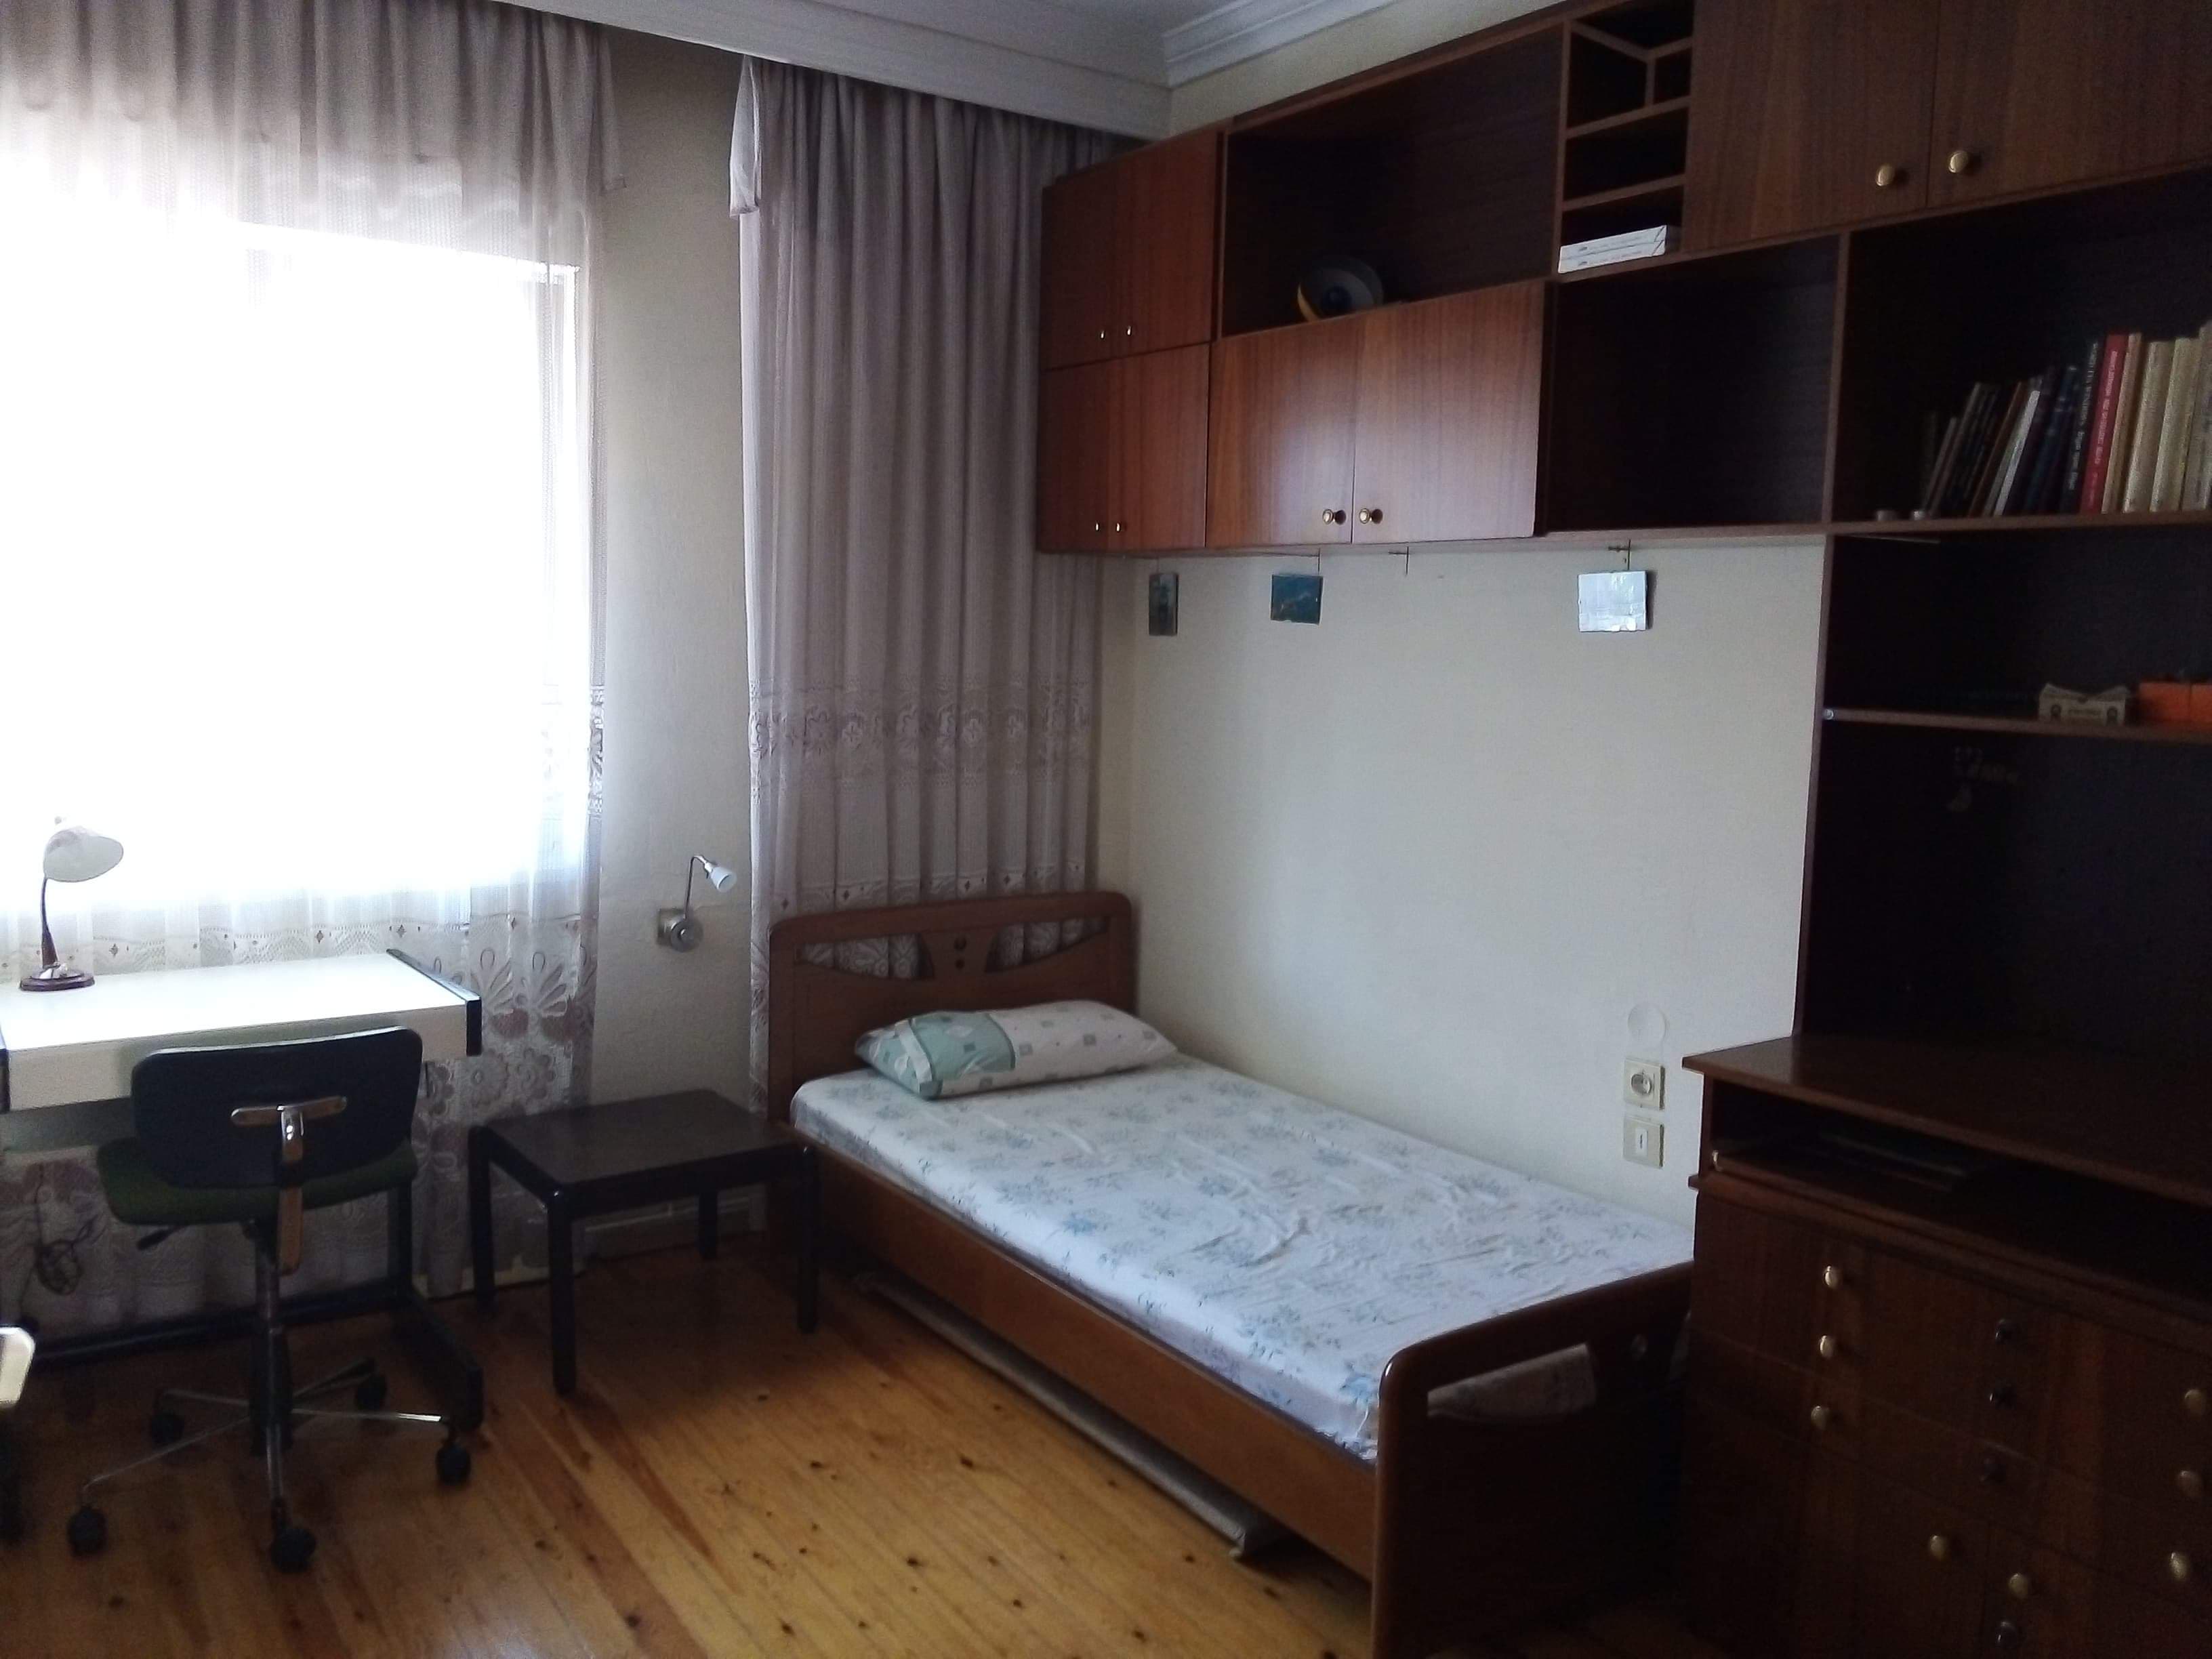 Room to rent | Department of European Educational Programmes